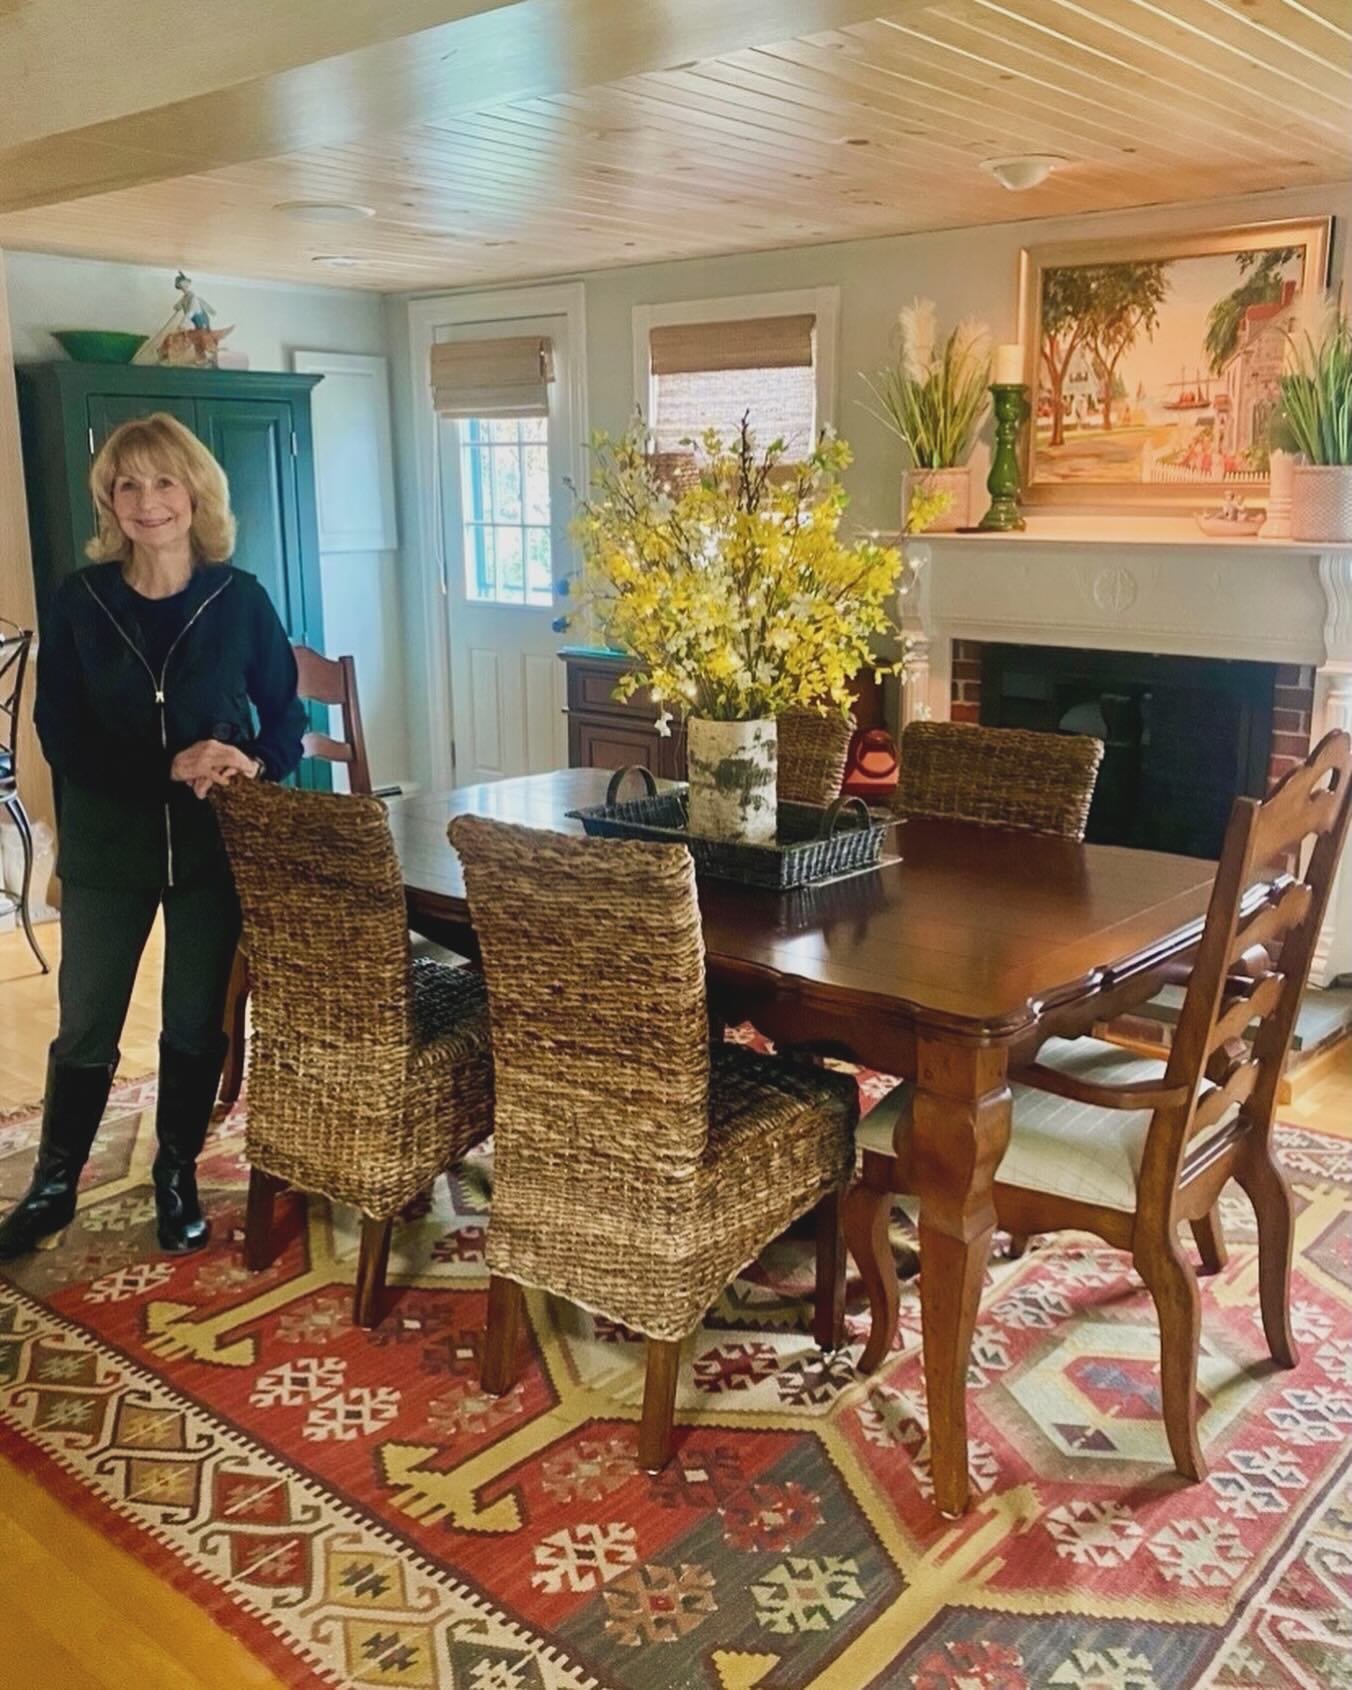 My cute Boss Mom in her kitchen at the lake. One of my most favorite places to be. Seriously, she moves things around so much I never know what decor I&rsquo;m going to walk into. Right now it looks very warm and inviting. She, is where I got my love